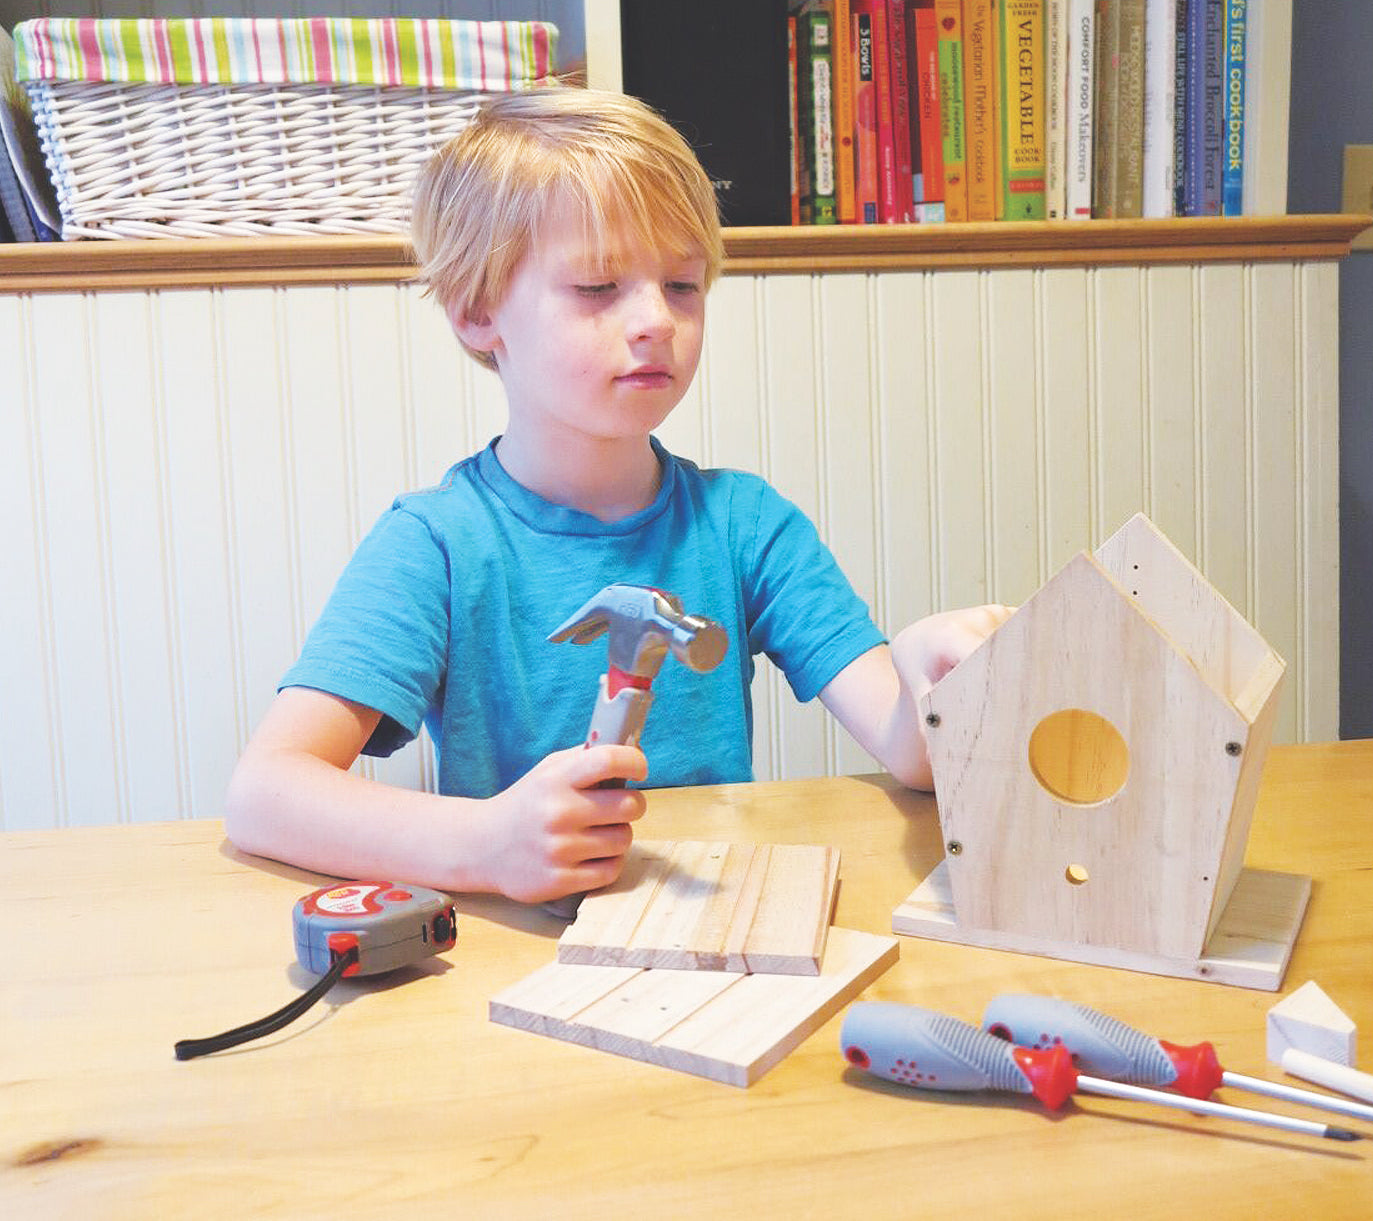 Working with Wood and Children